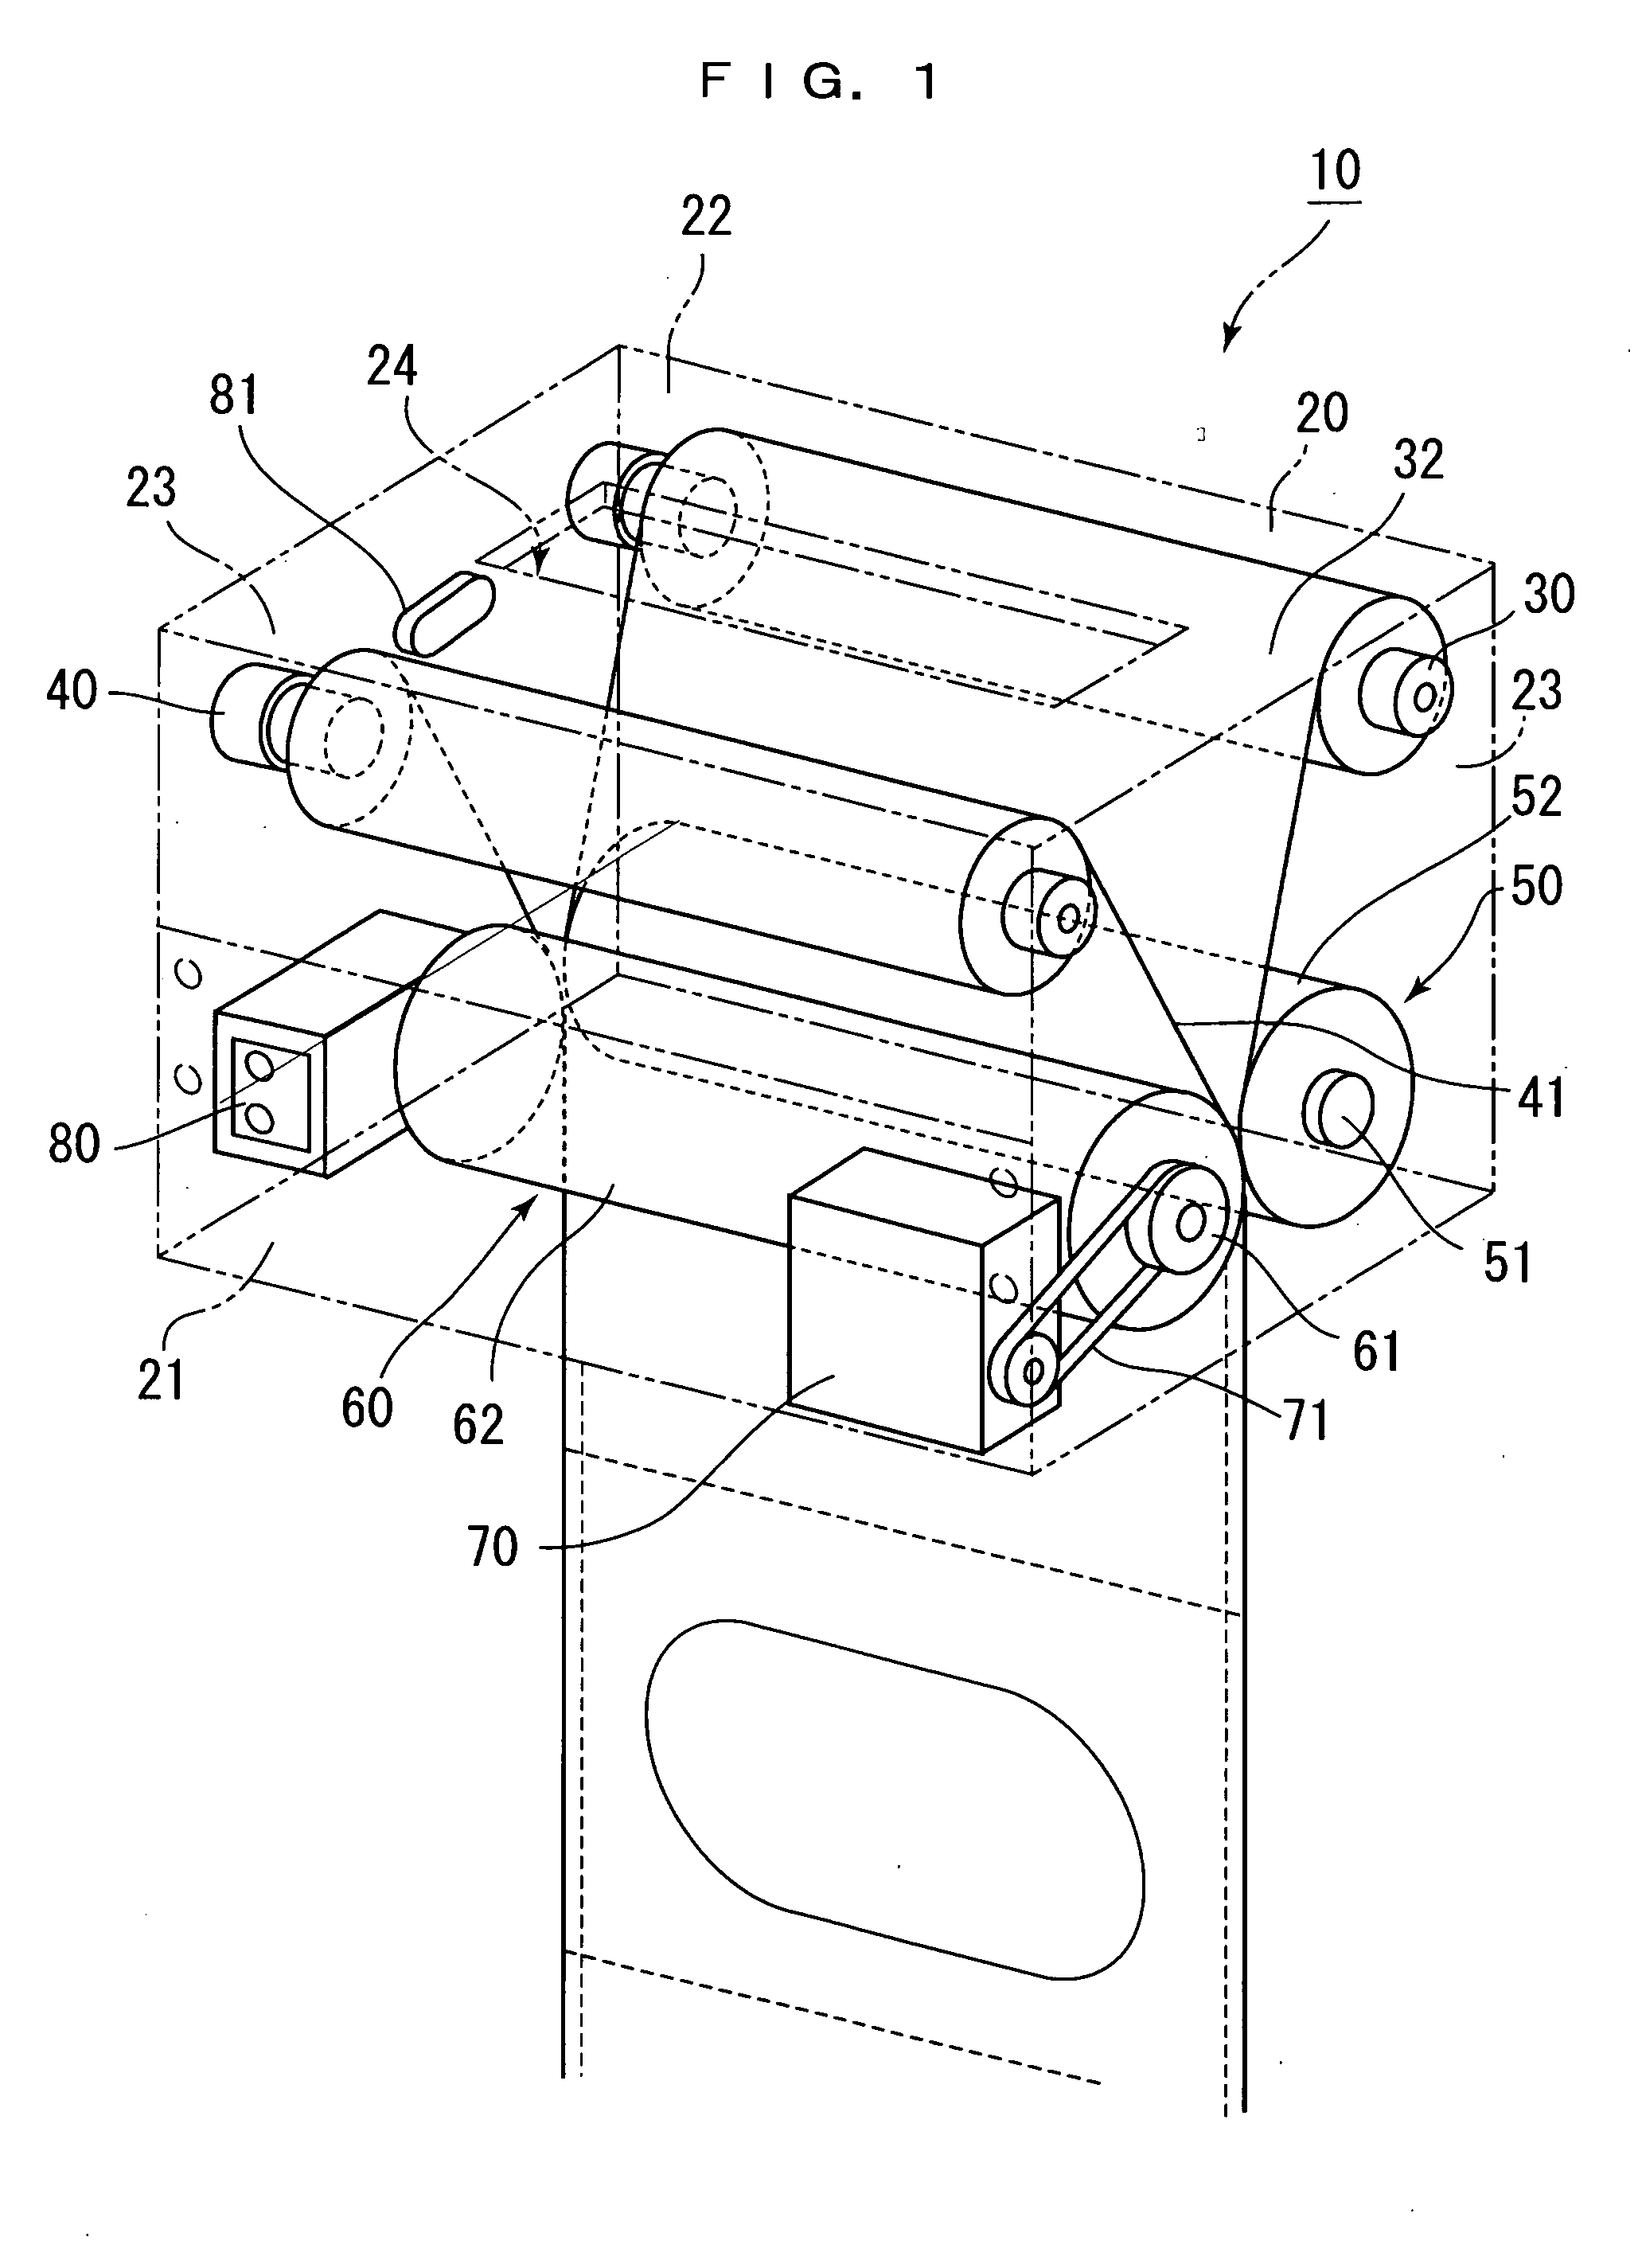 Packaging device and trash box